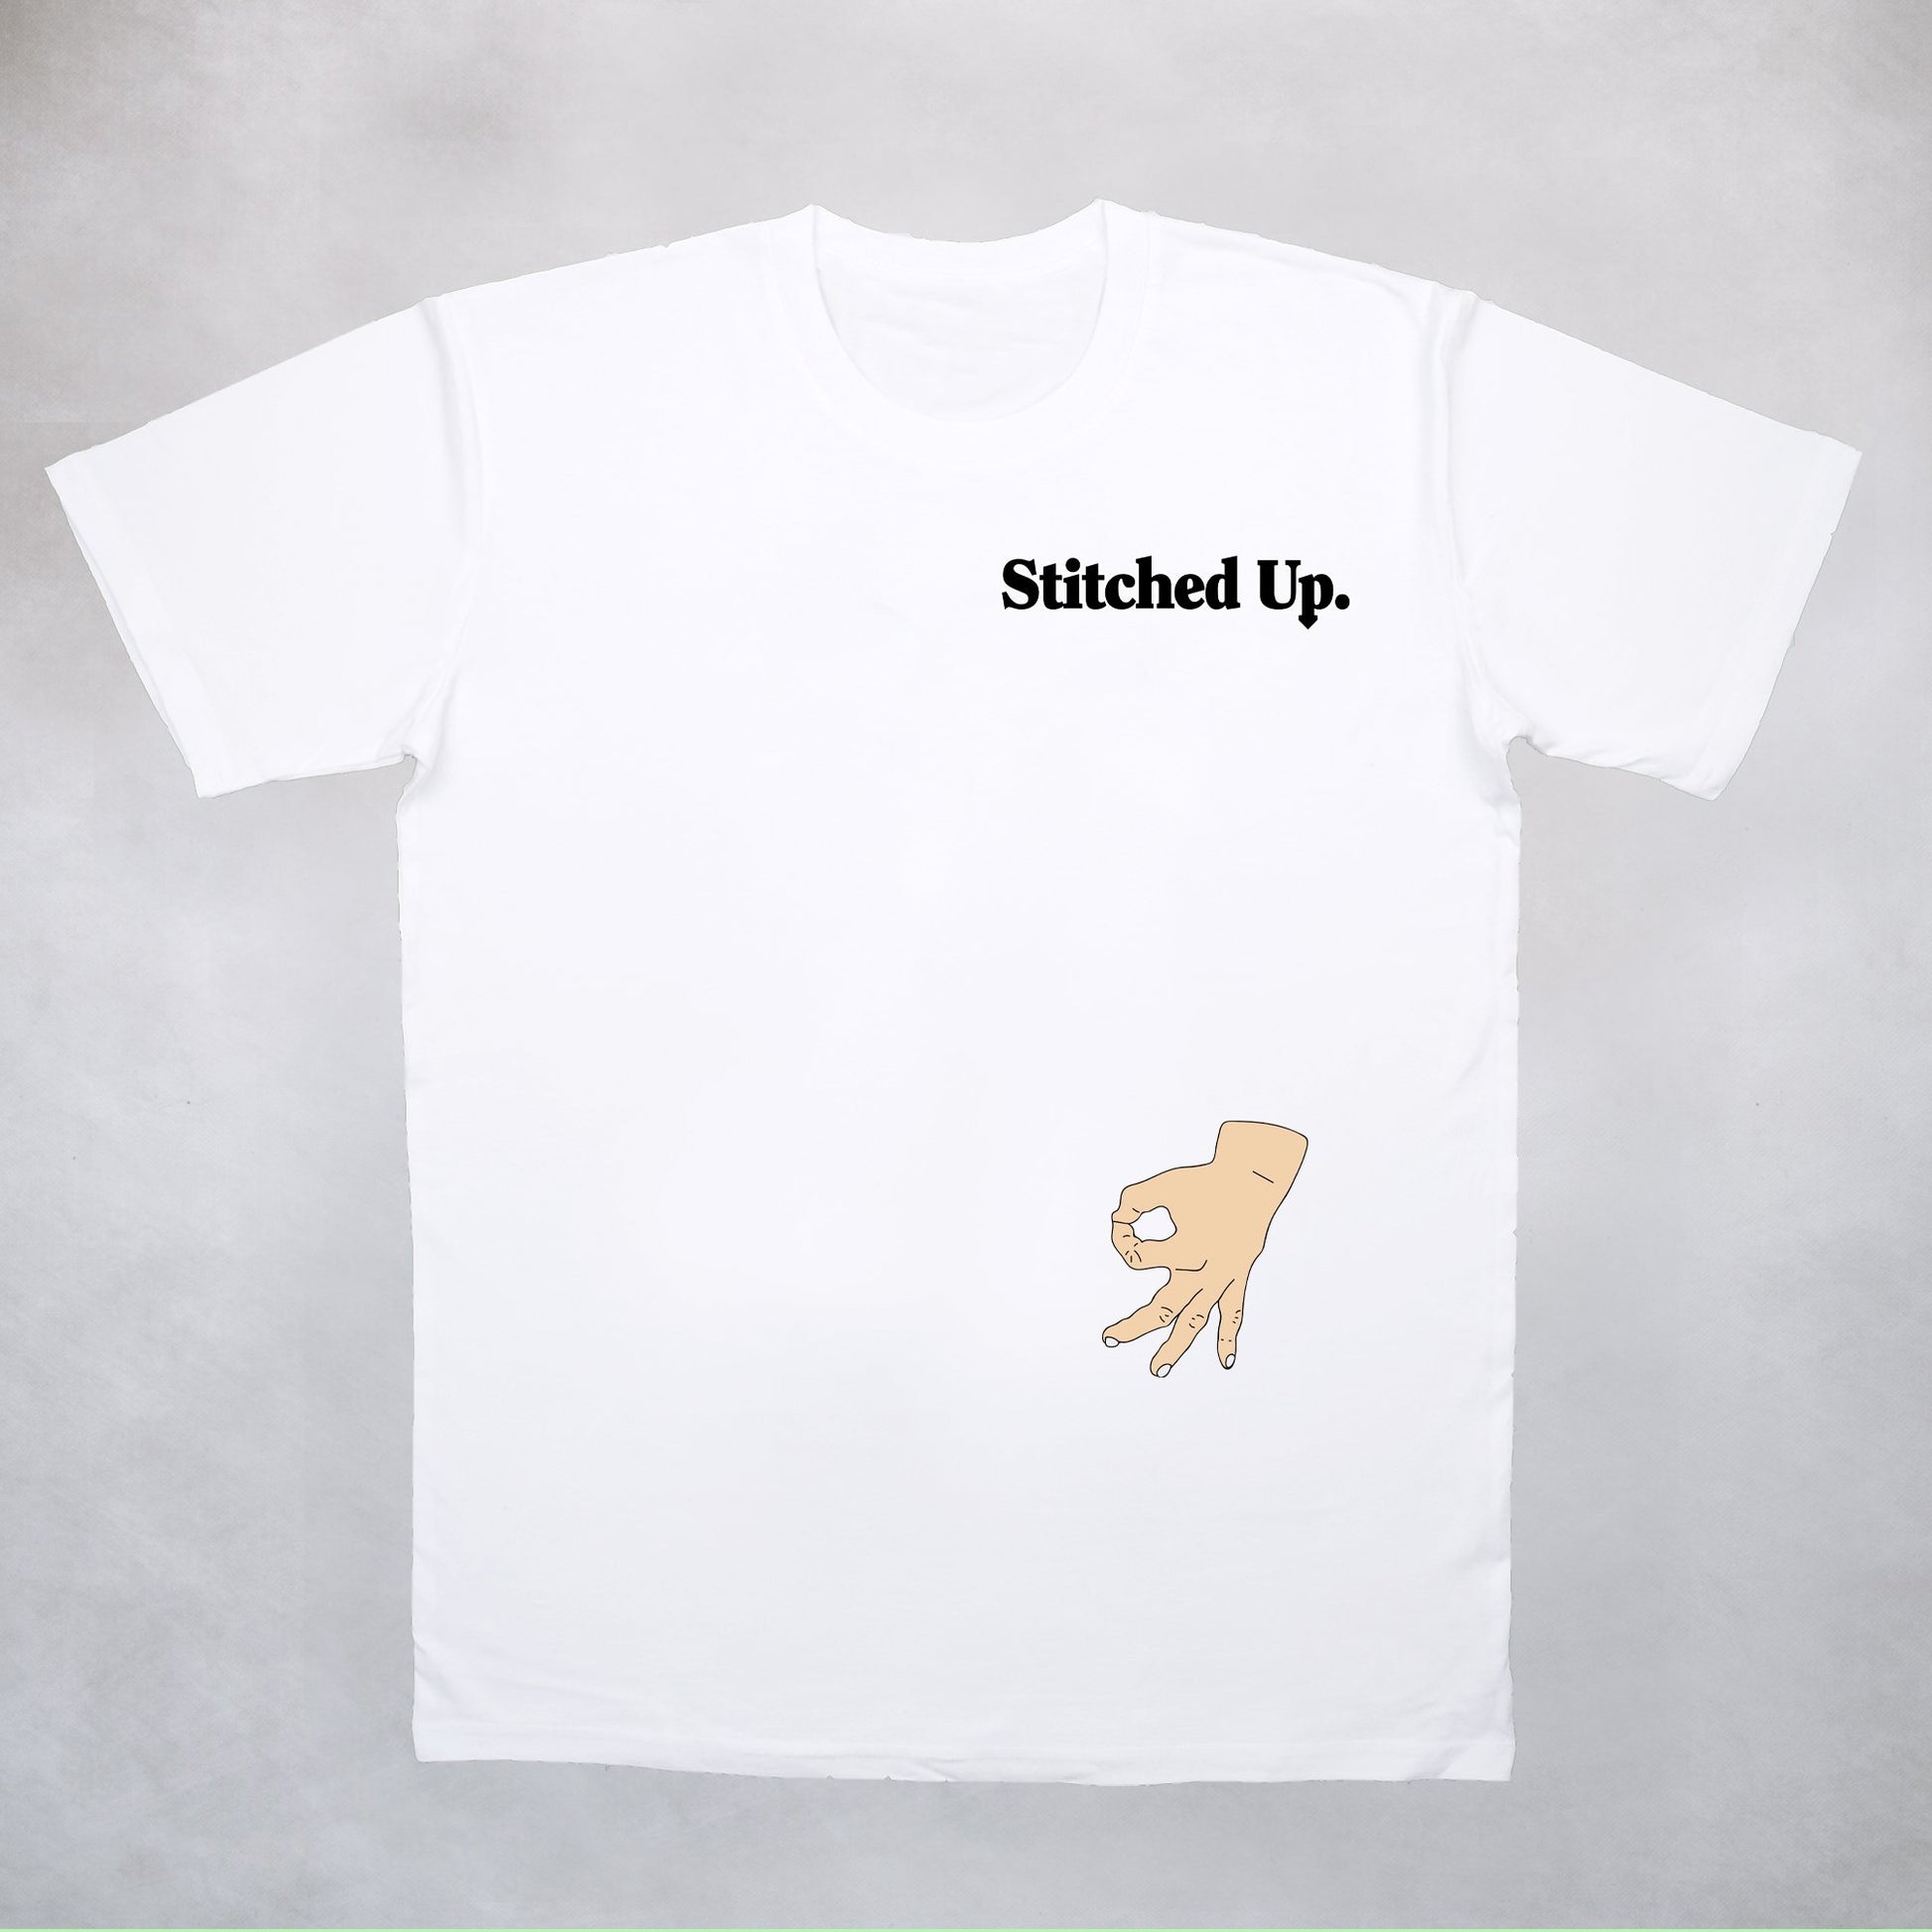 Classy Duds Short Sleeve T-Shirts S / White / Standard Stitched Up Tee